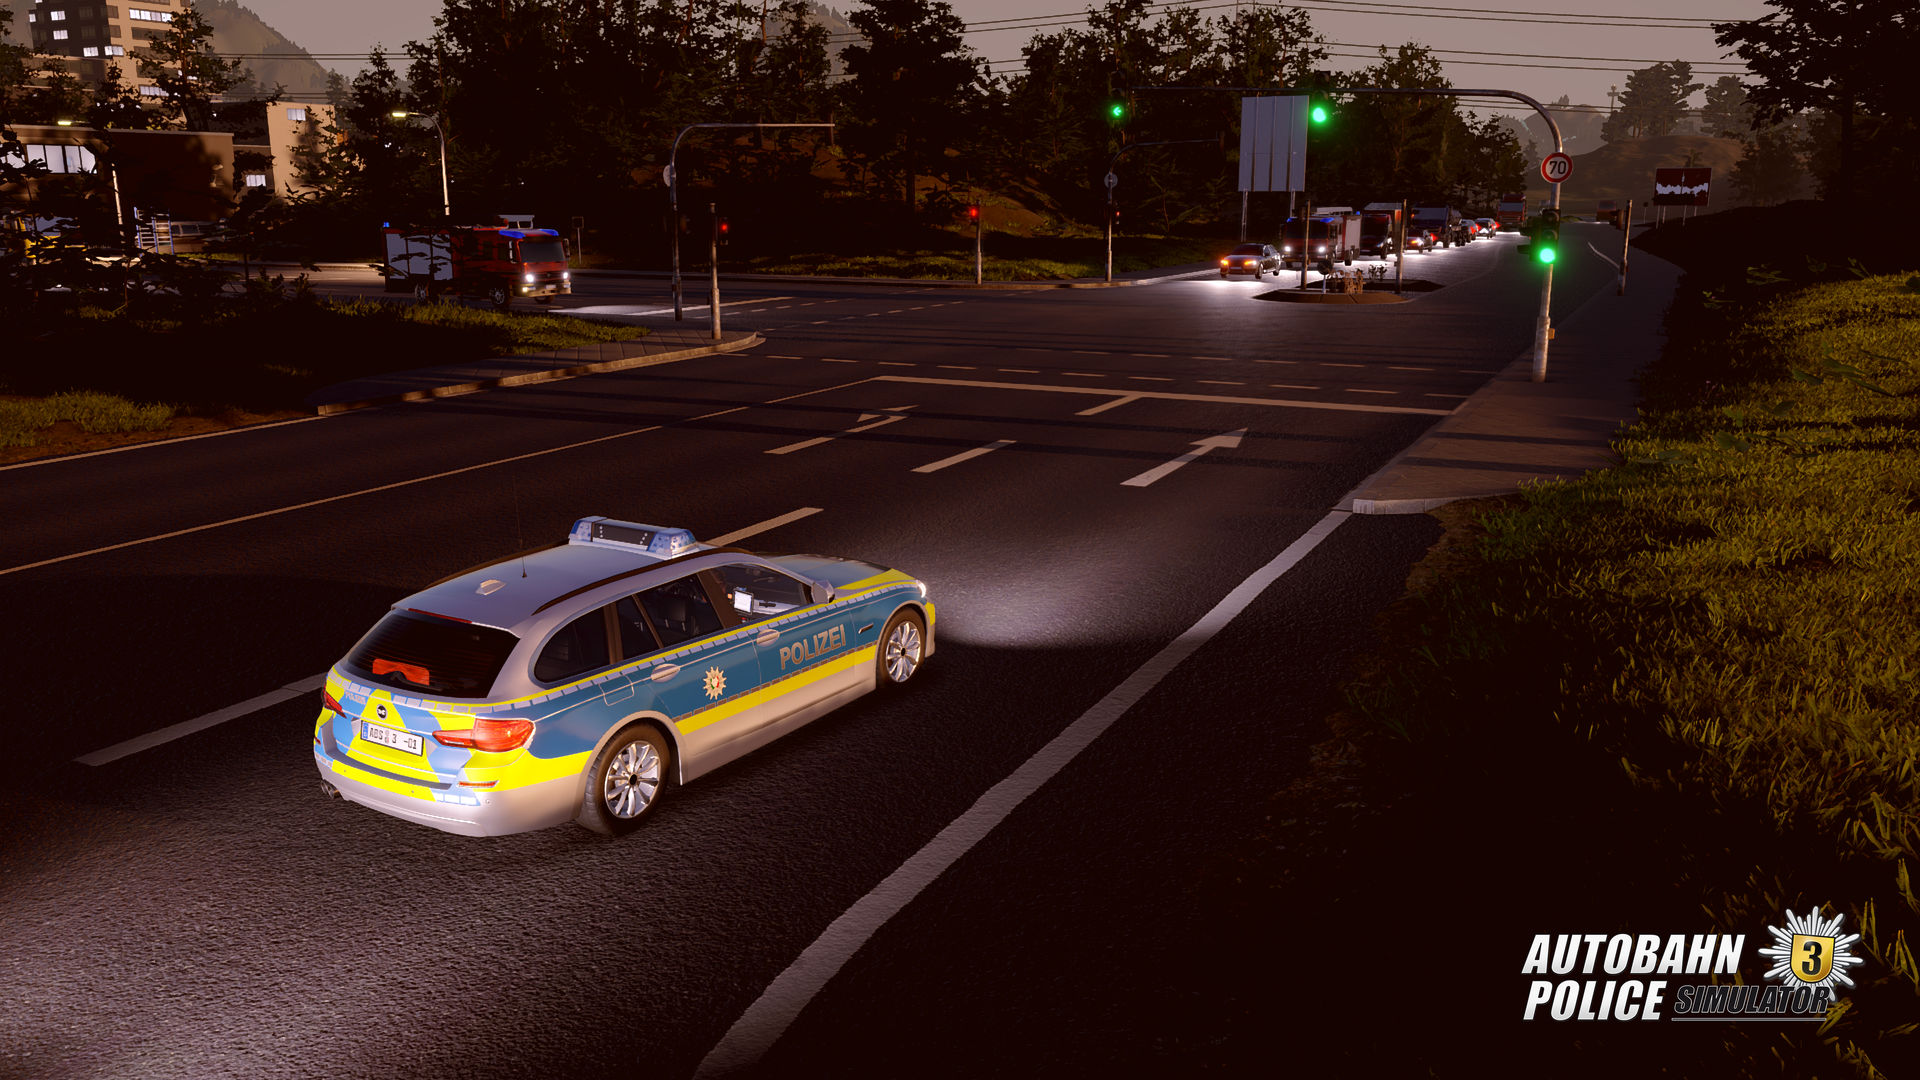 – released z-software on Police 23 and… 3 Simulator PC Autobahn for will June be